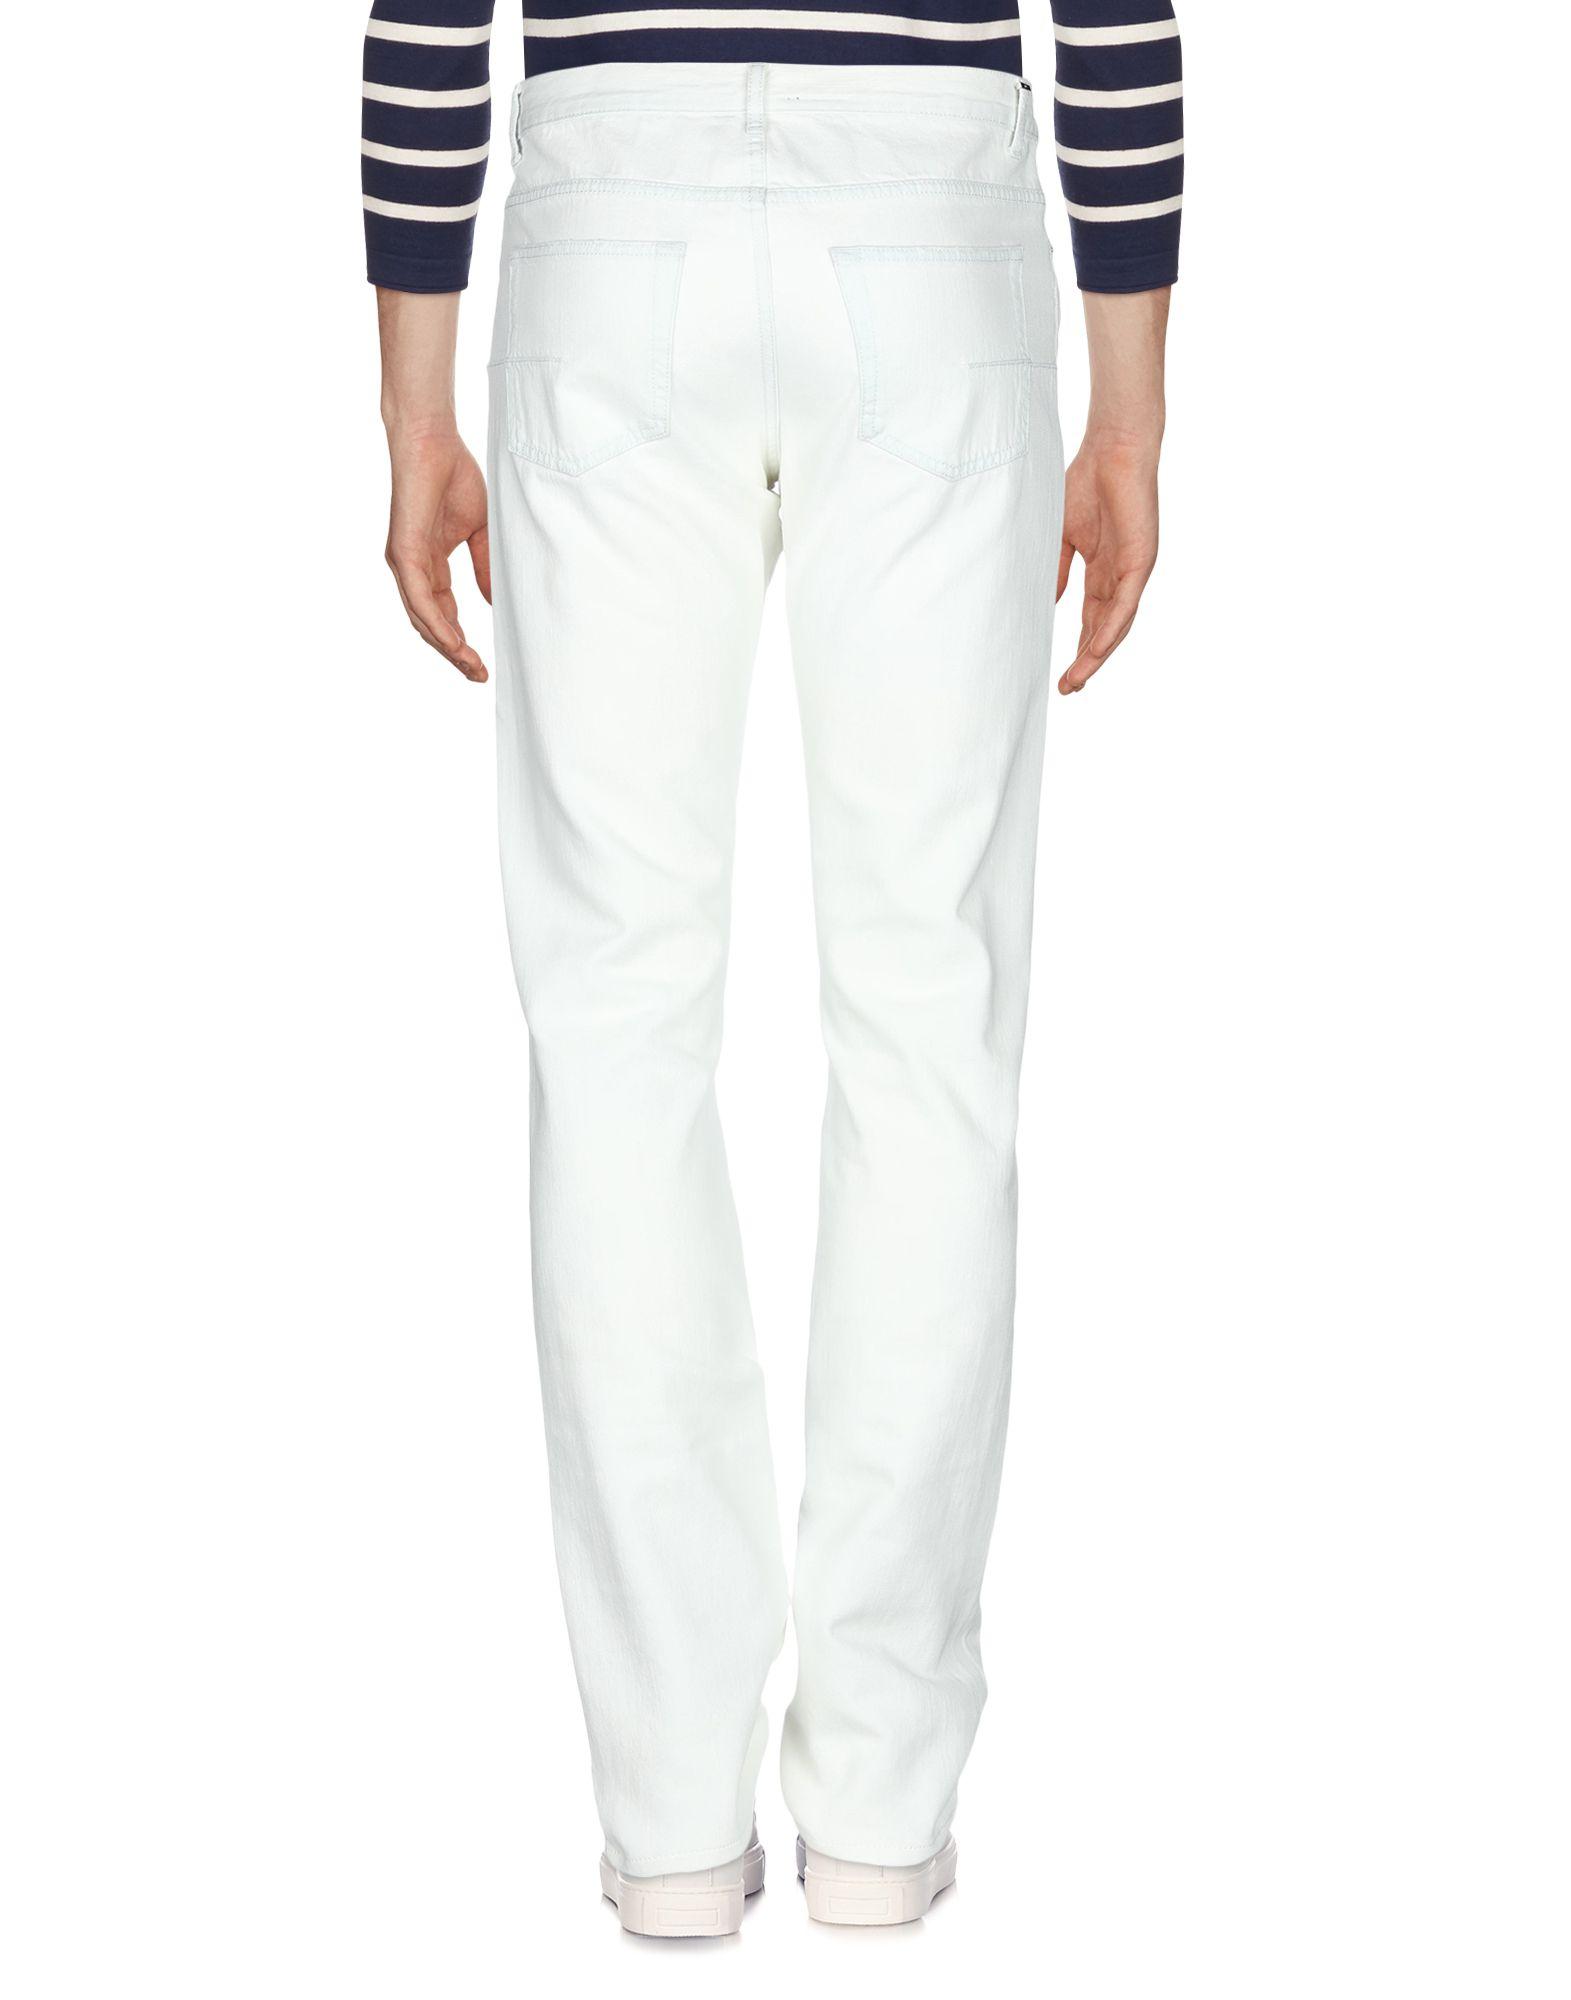 Dior Denim Trousers in White for Men - Lyst